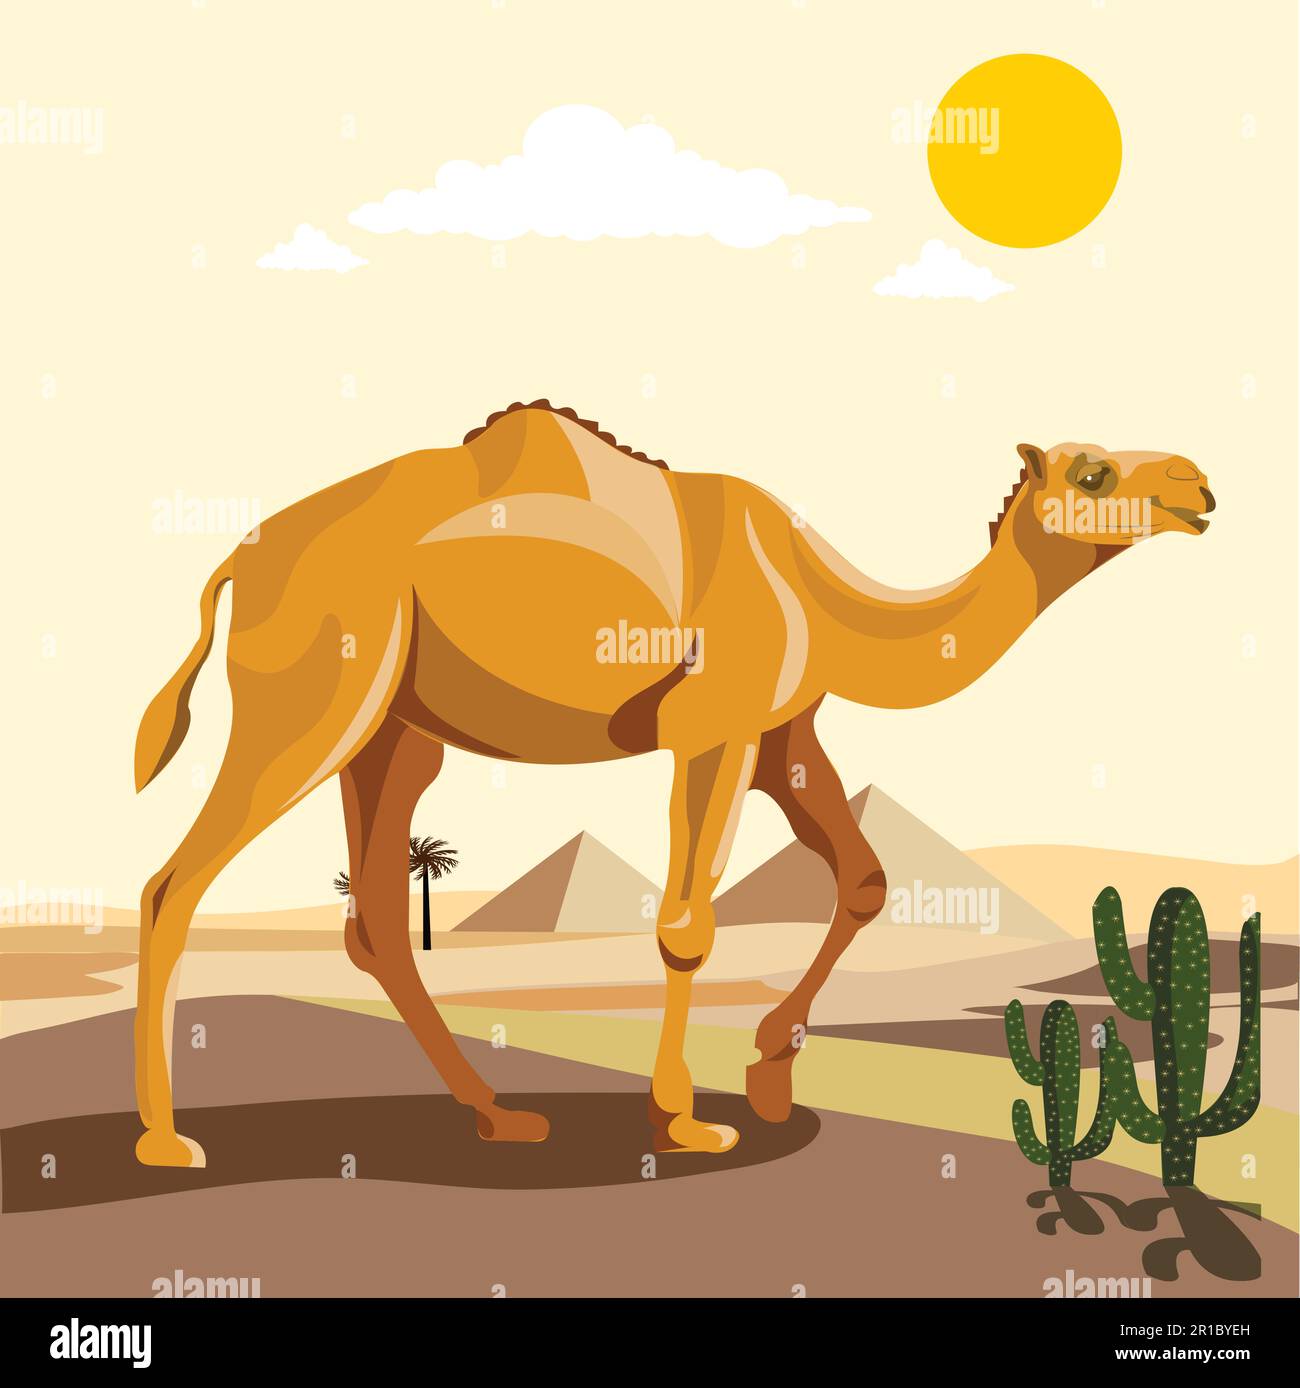 Desert camel composition with wasteland landscape and flat images with train of camels crossing deserted place vector illustration. One humped camel.C Stock Vector